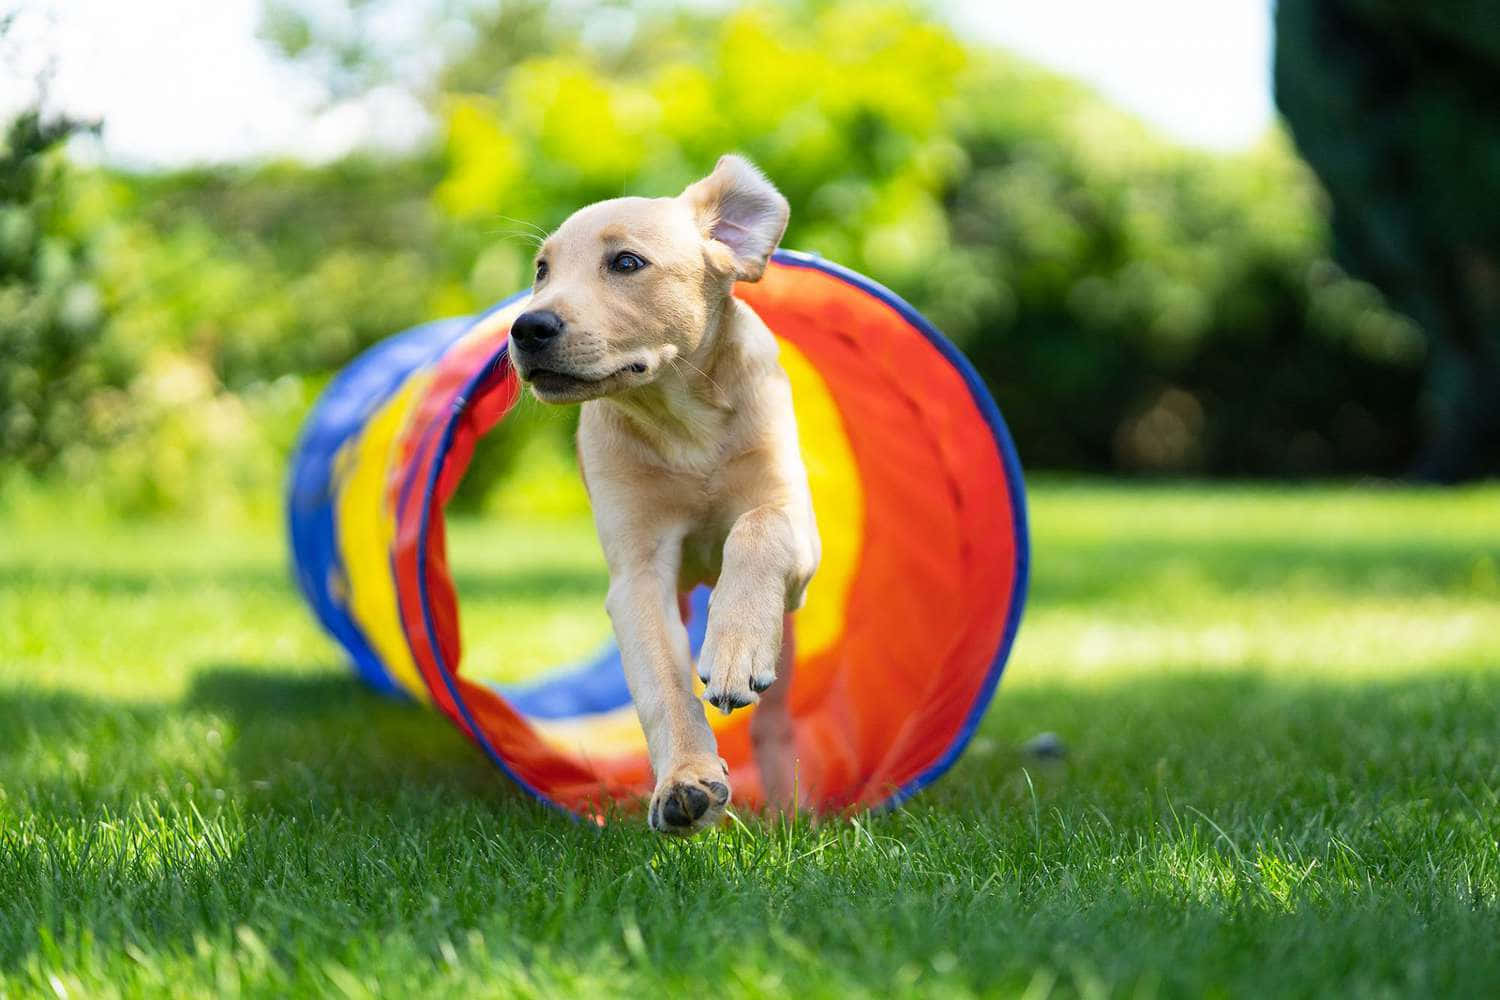 Agile Sports Dog In Action Wallpaper